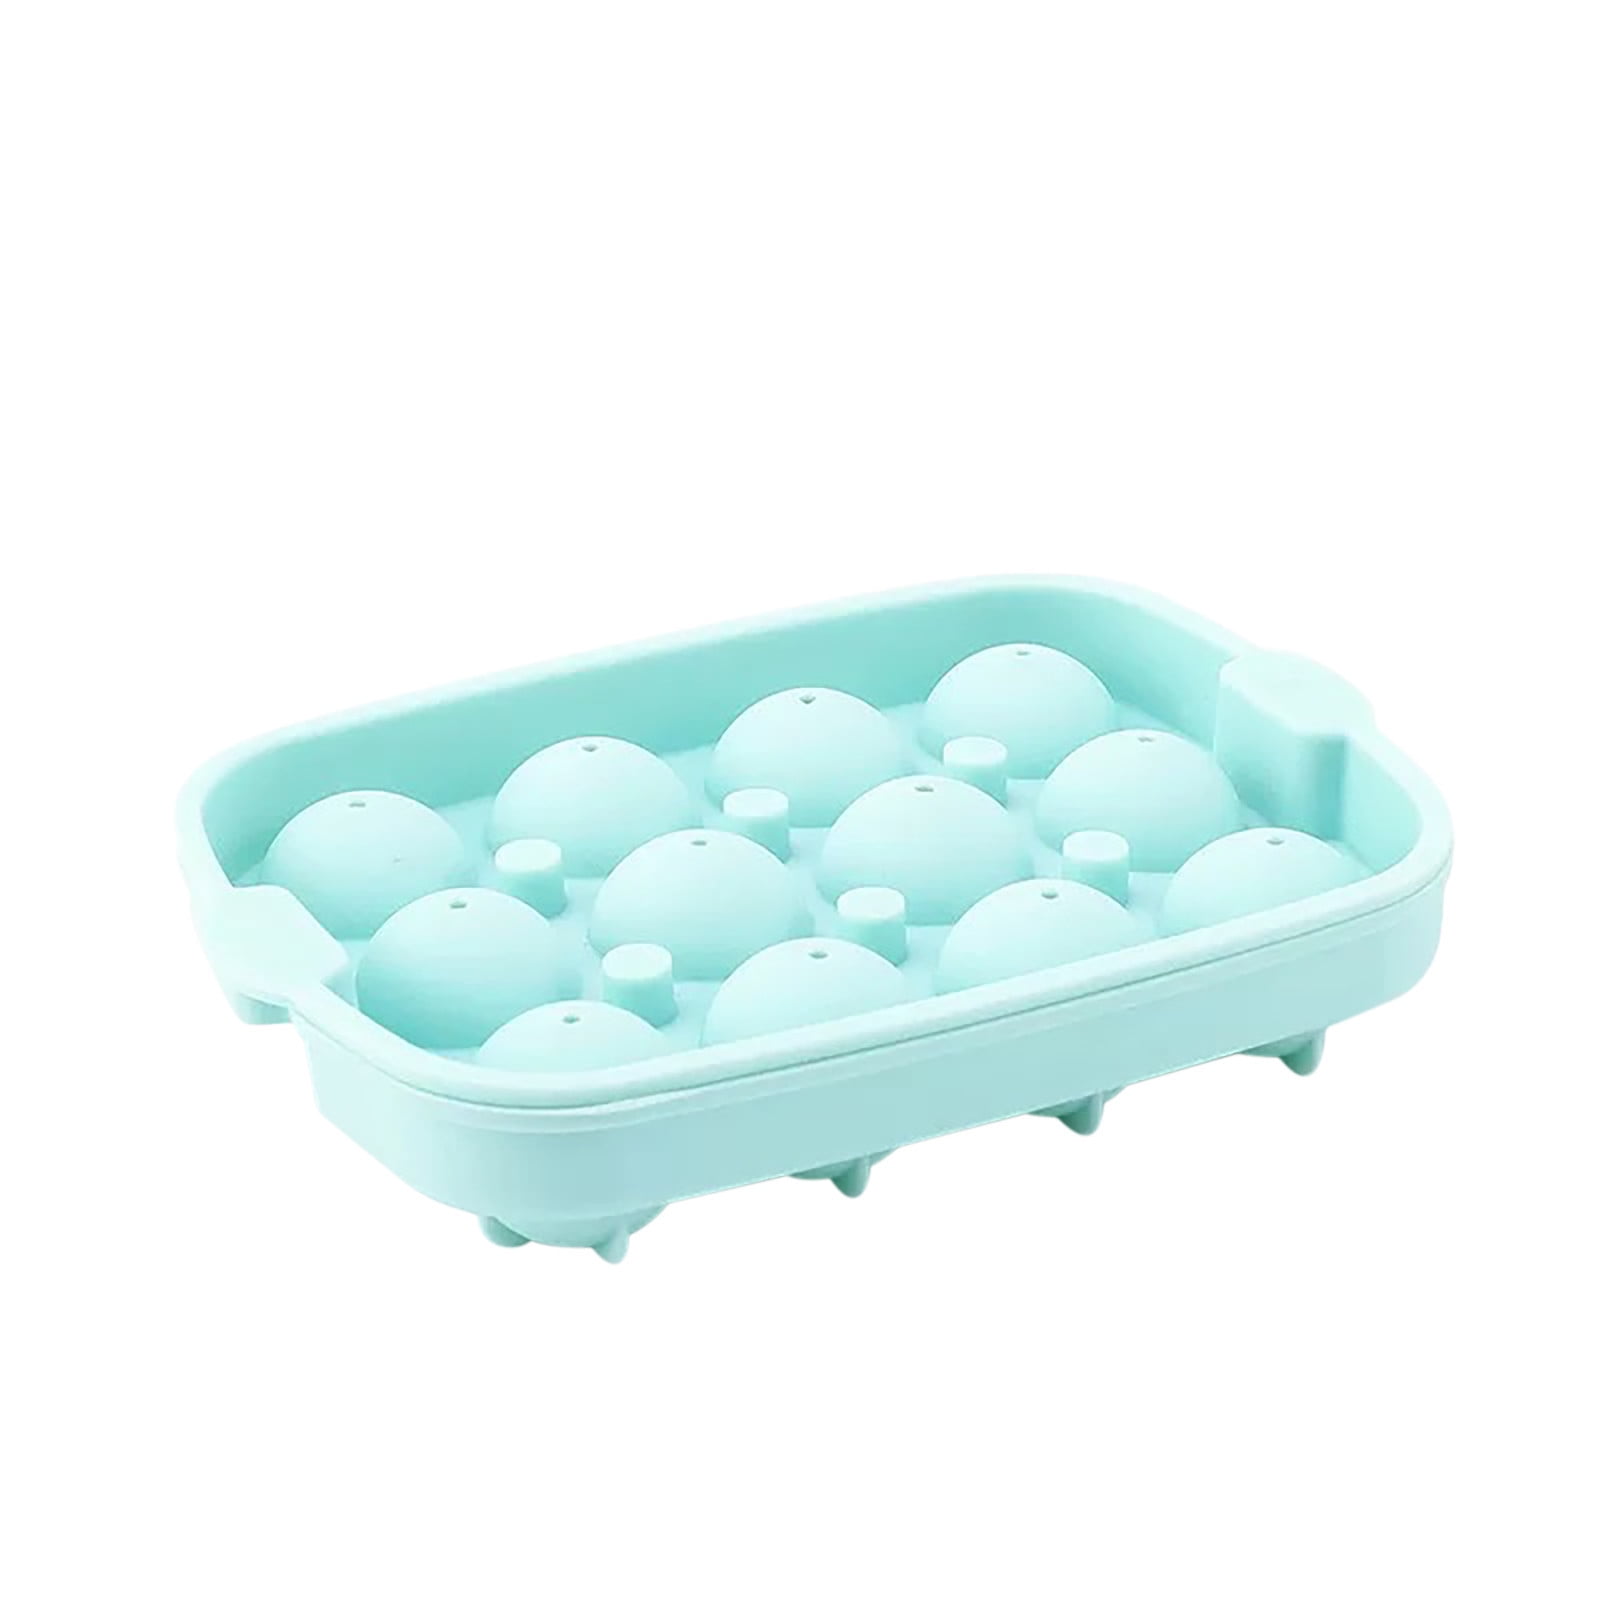 TopAufell Silicone 3Pcs Mini Ice Cube Trays 160 Grids Square Ice Cube Molds  Mini Ice Cube Tray for freezer Baby Food,Water, Whis